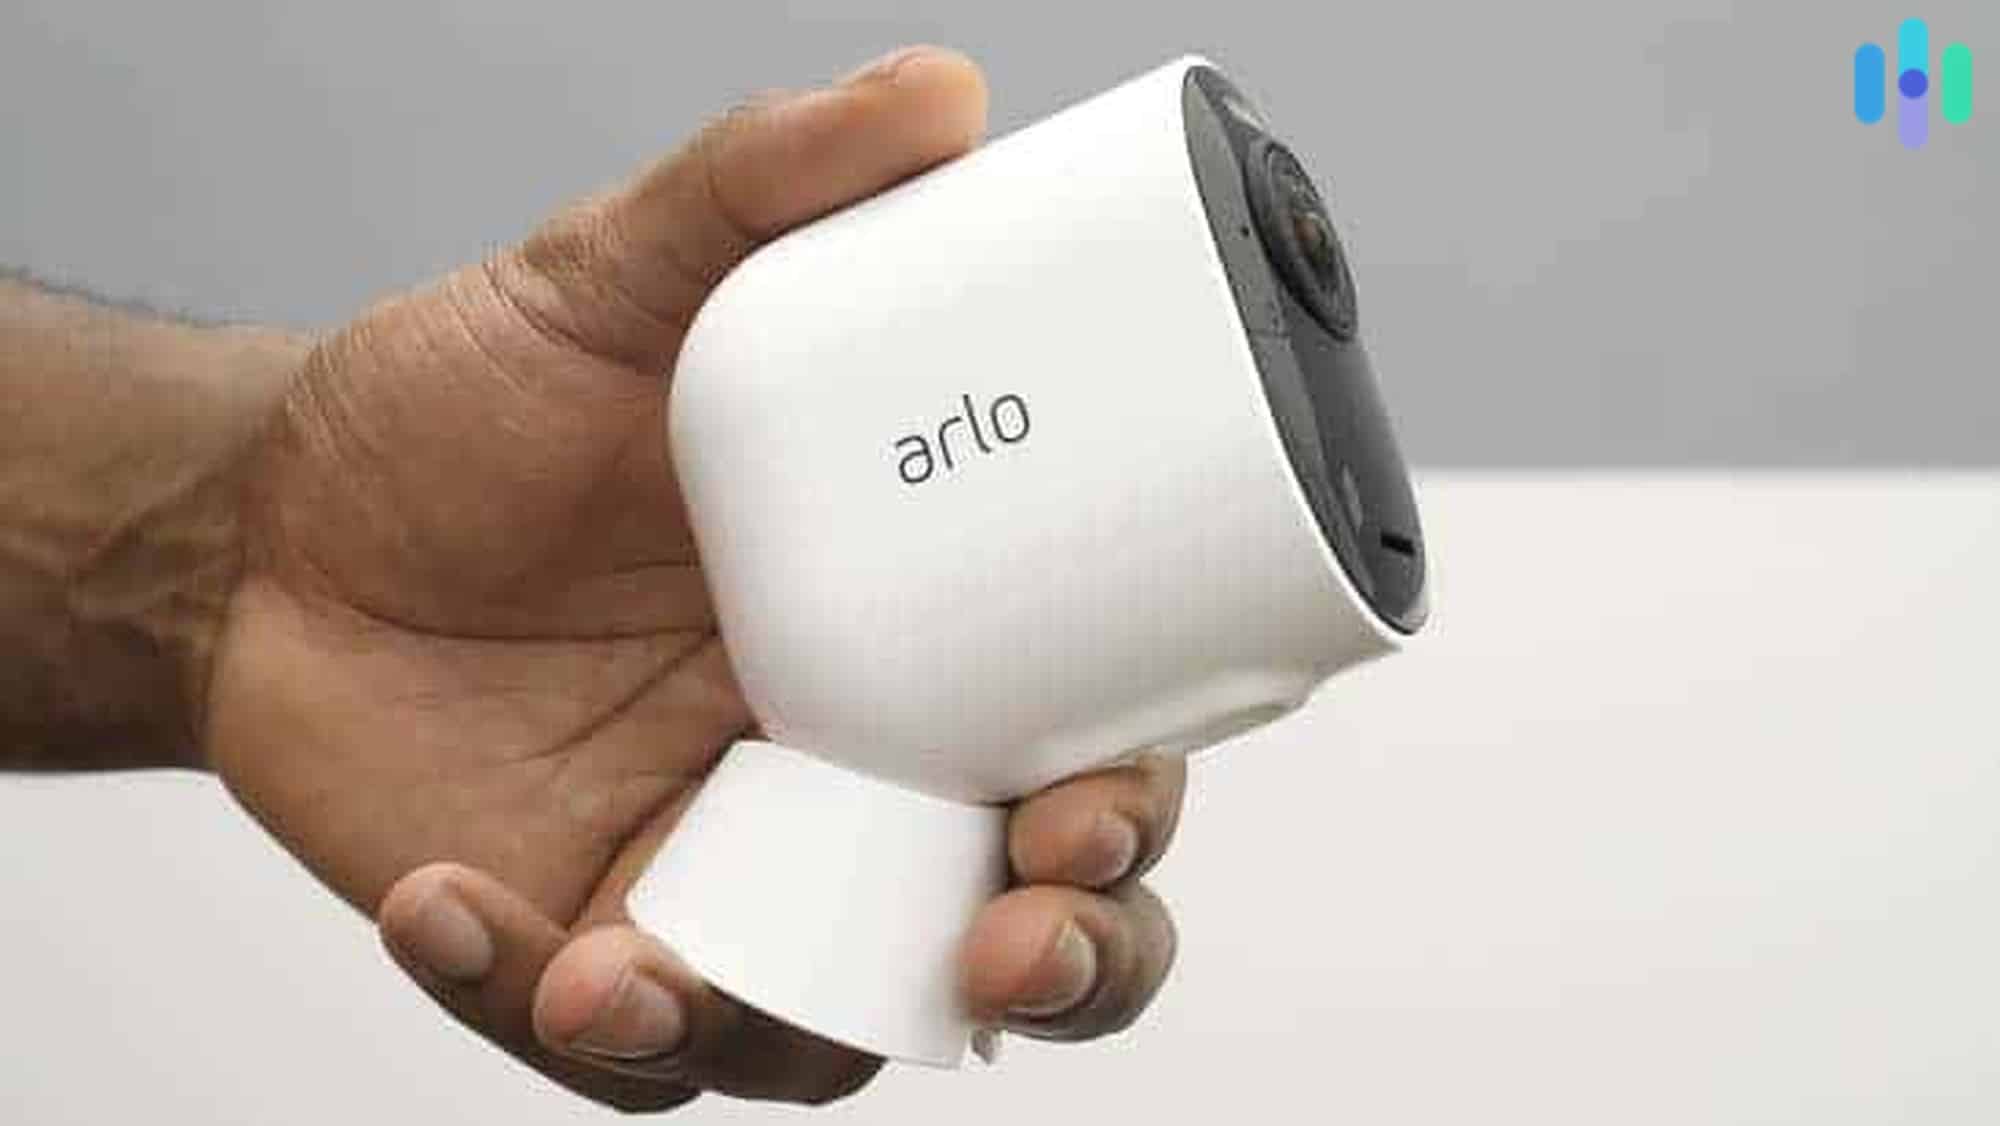 Arlo Pro 5 2k security camera review - Geeky Gadgets